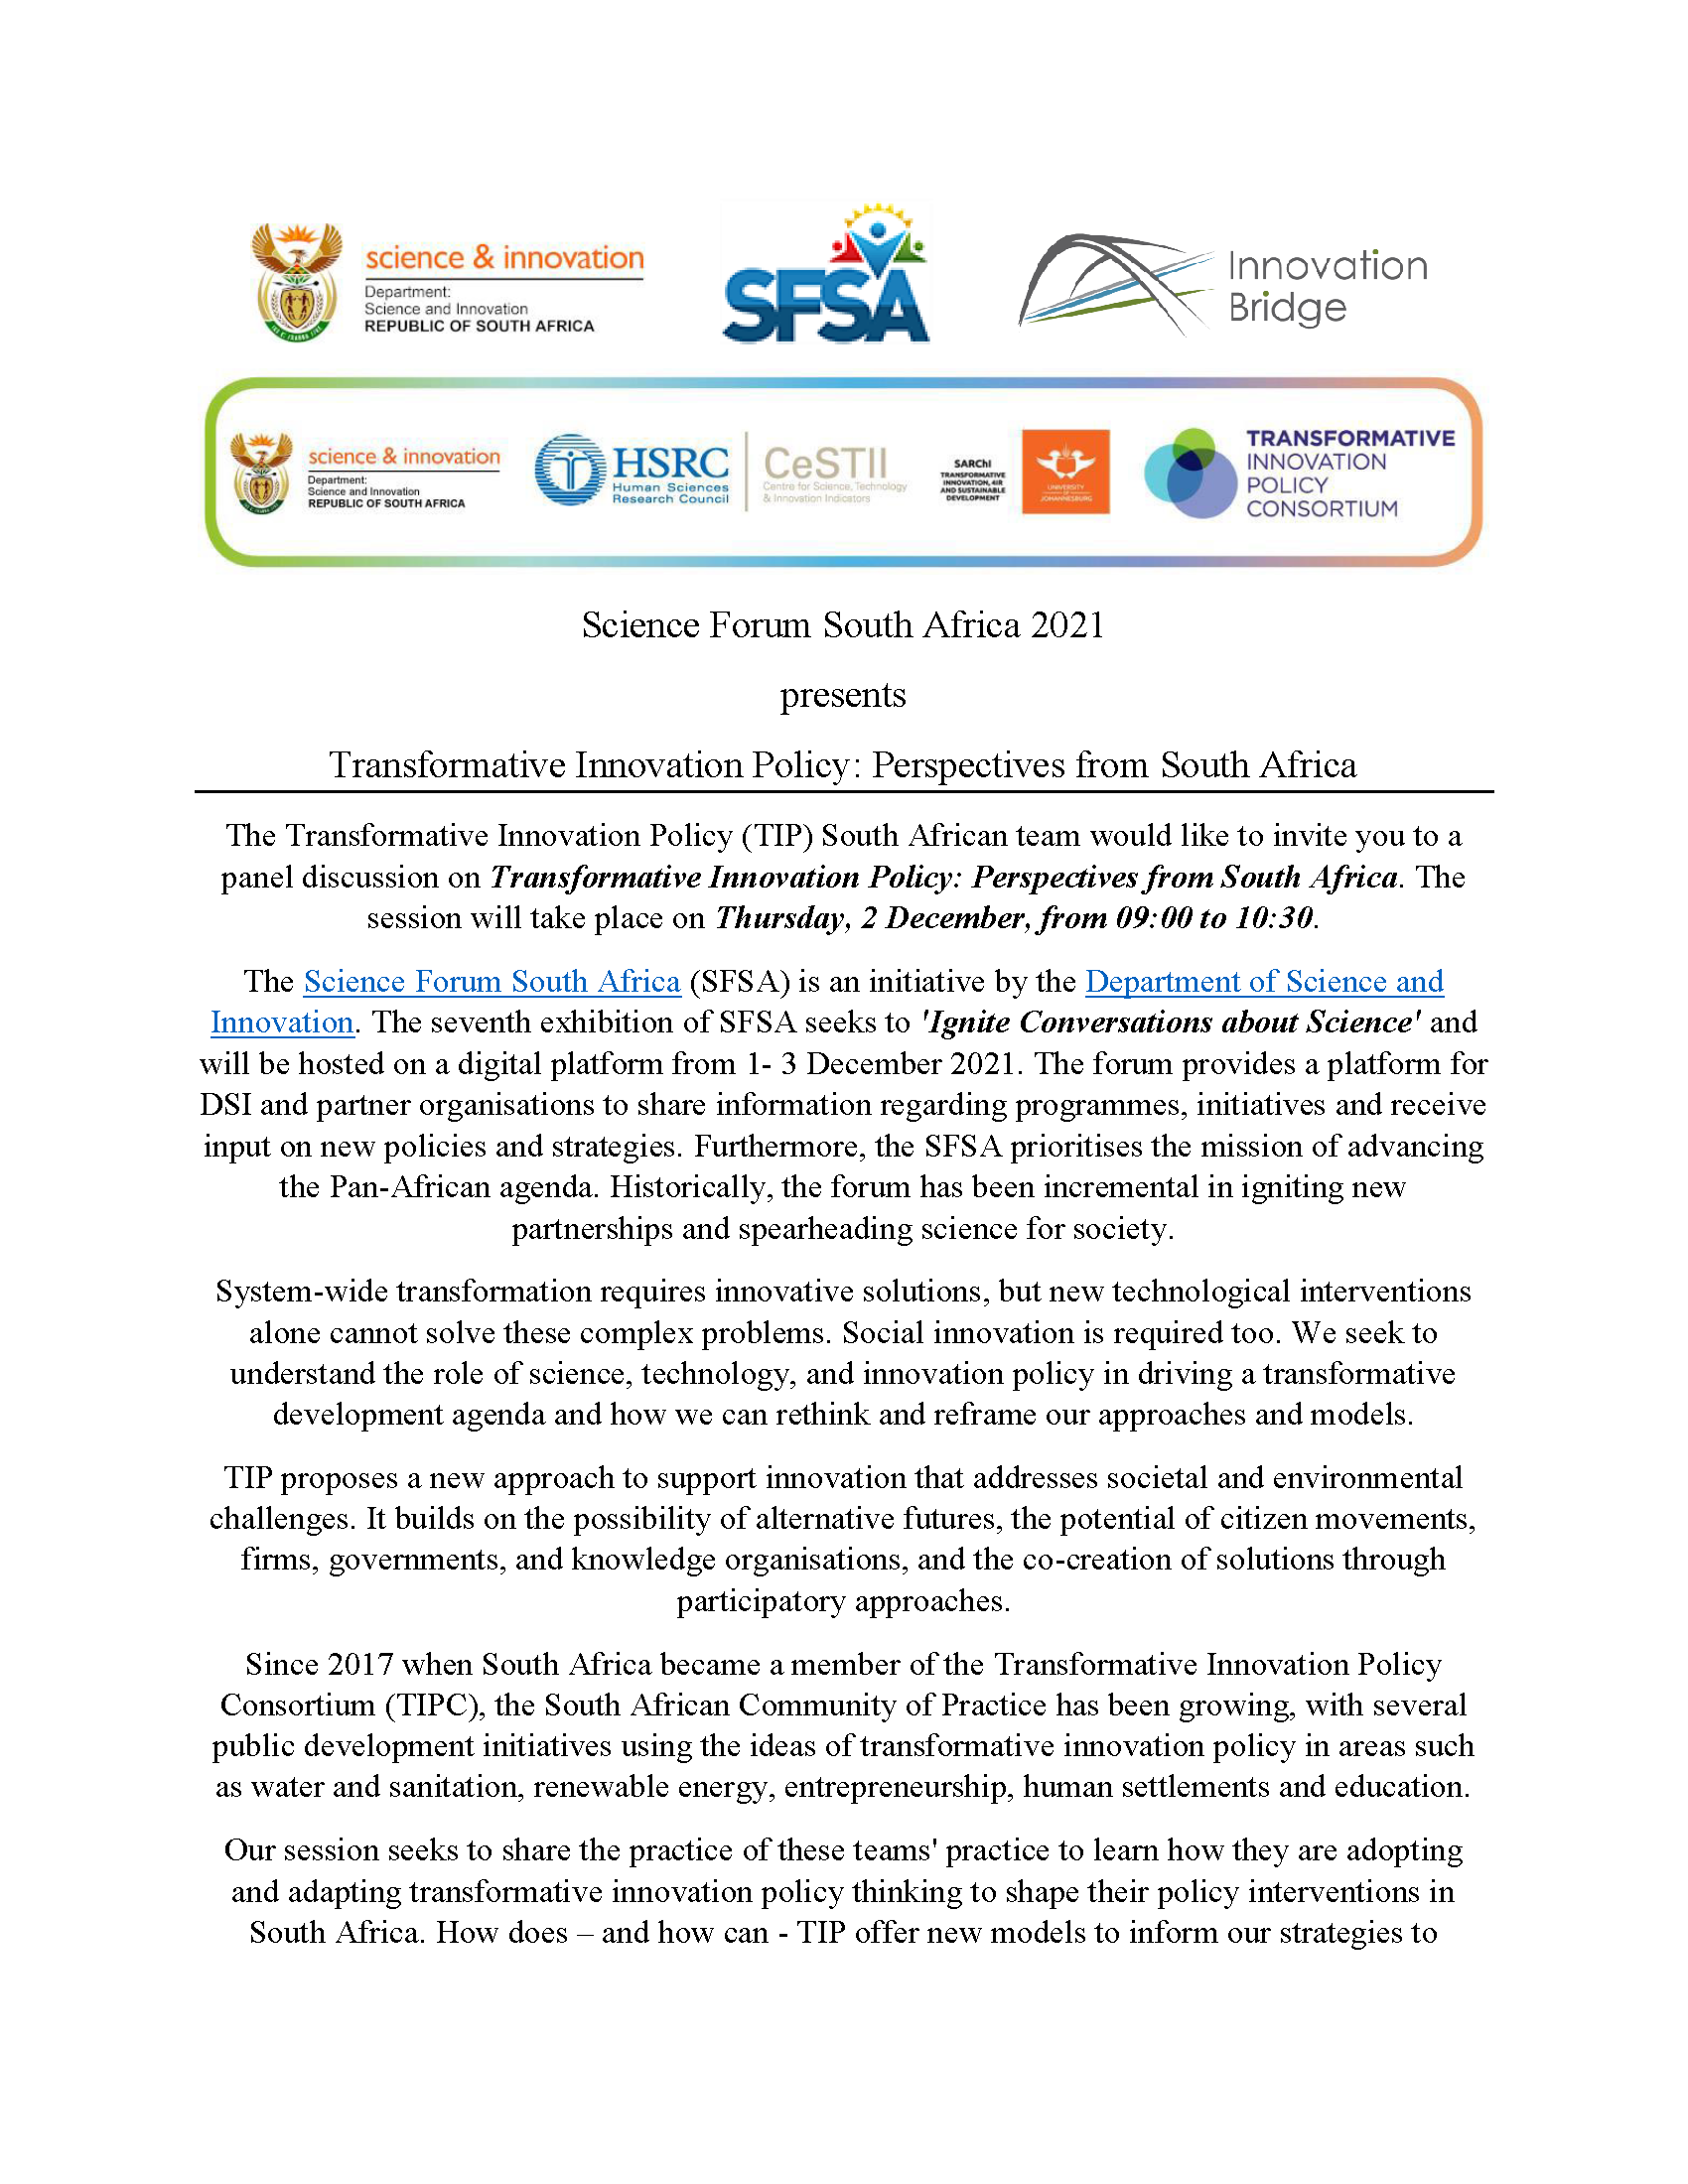 Transformative Innovation Policy: Perspectives from South Africa